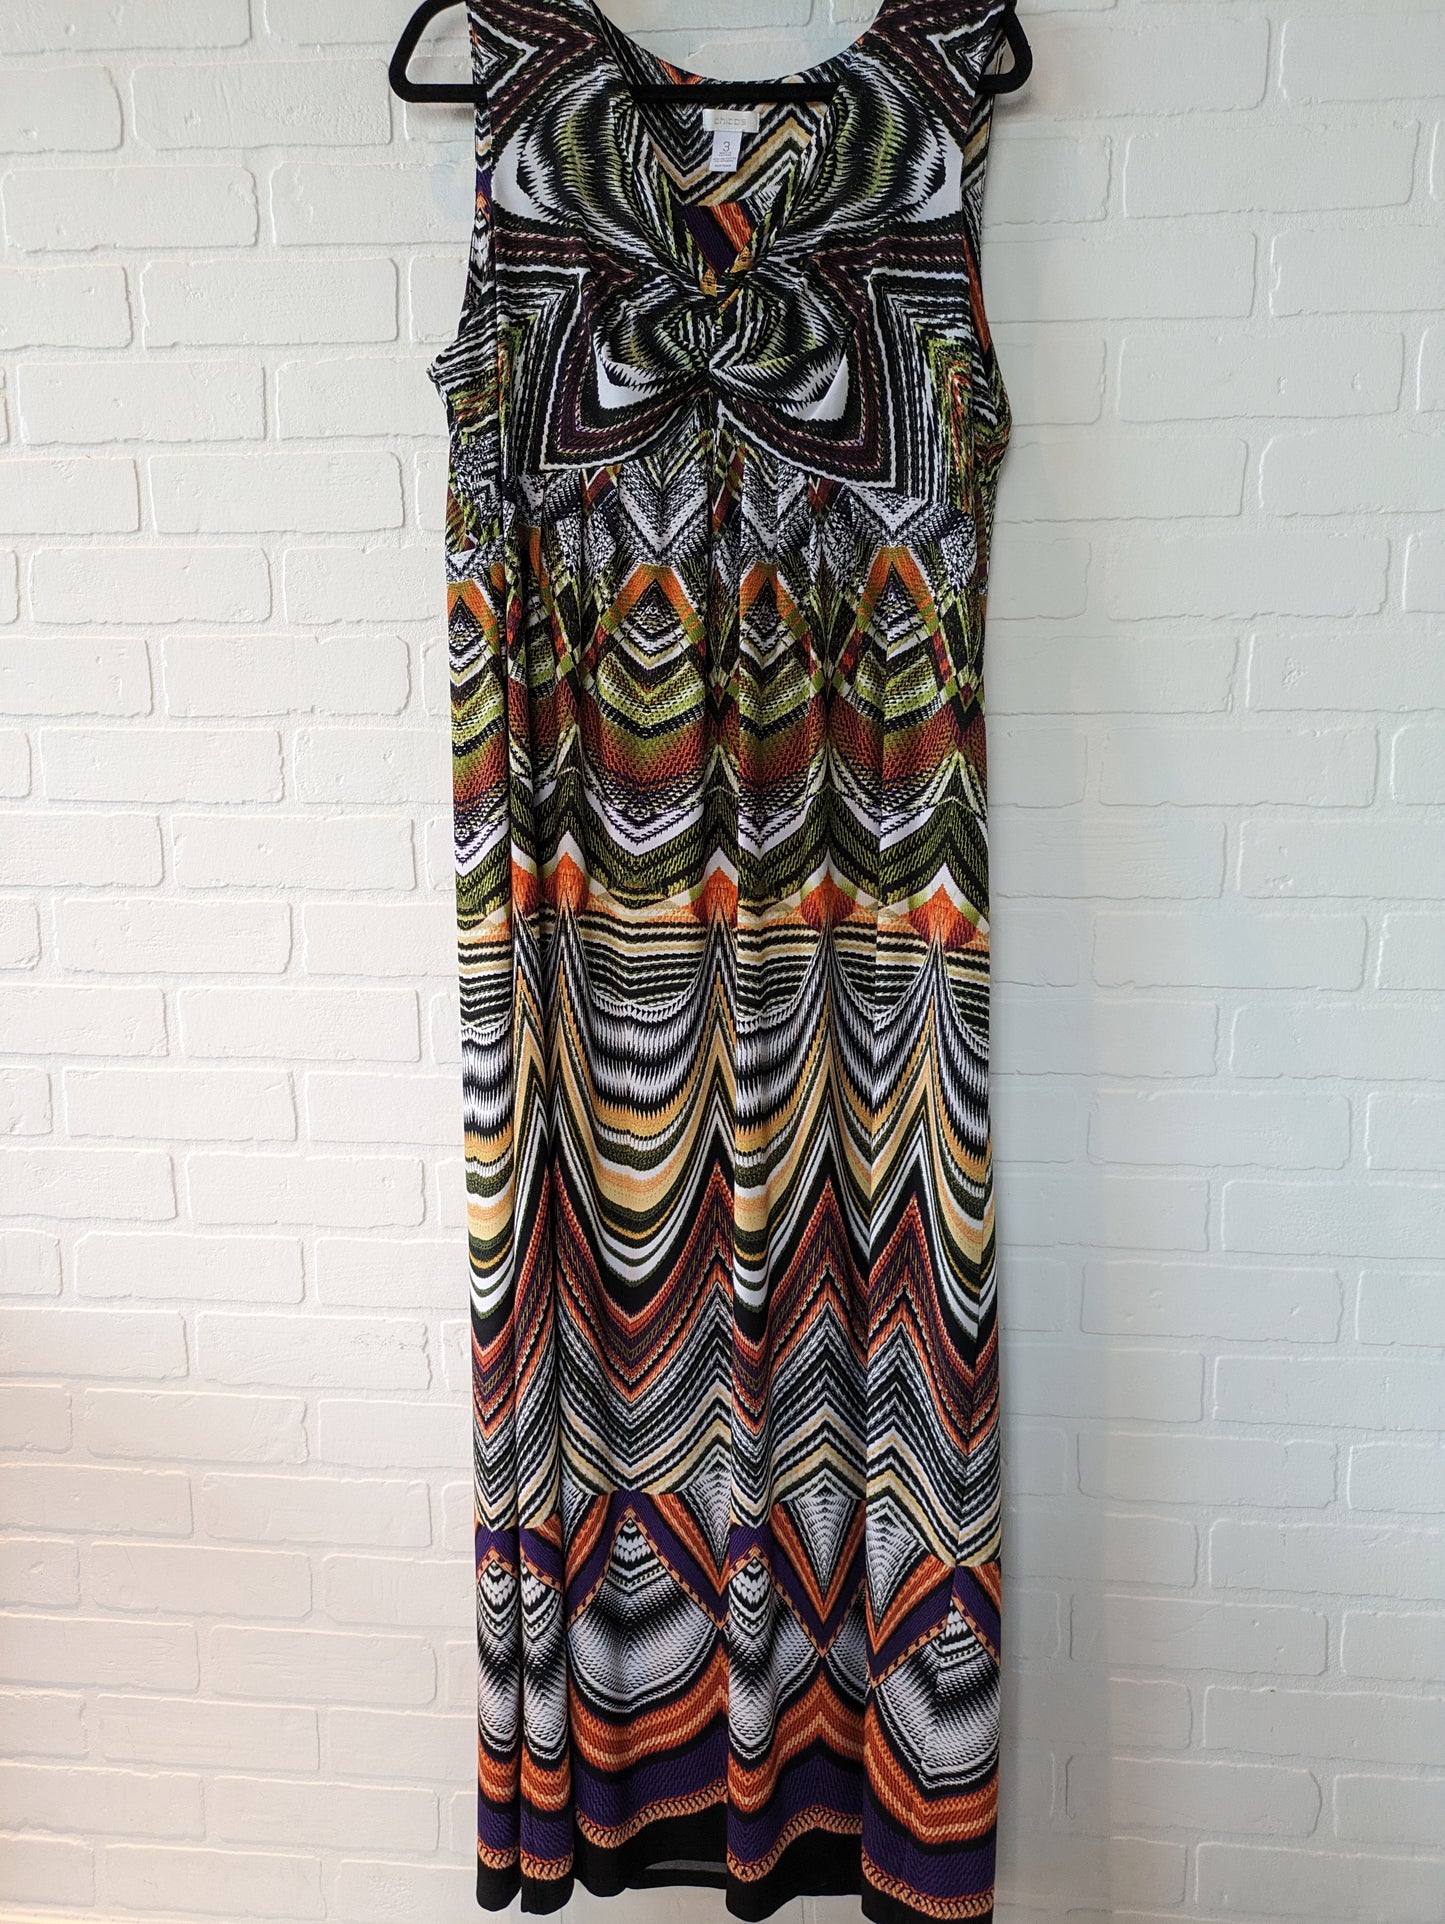 Dress Casual Maxi By Chicos  Size: Xl